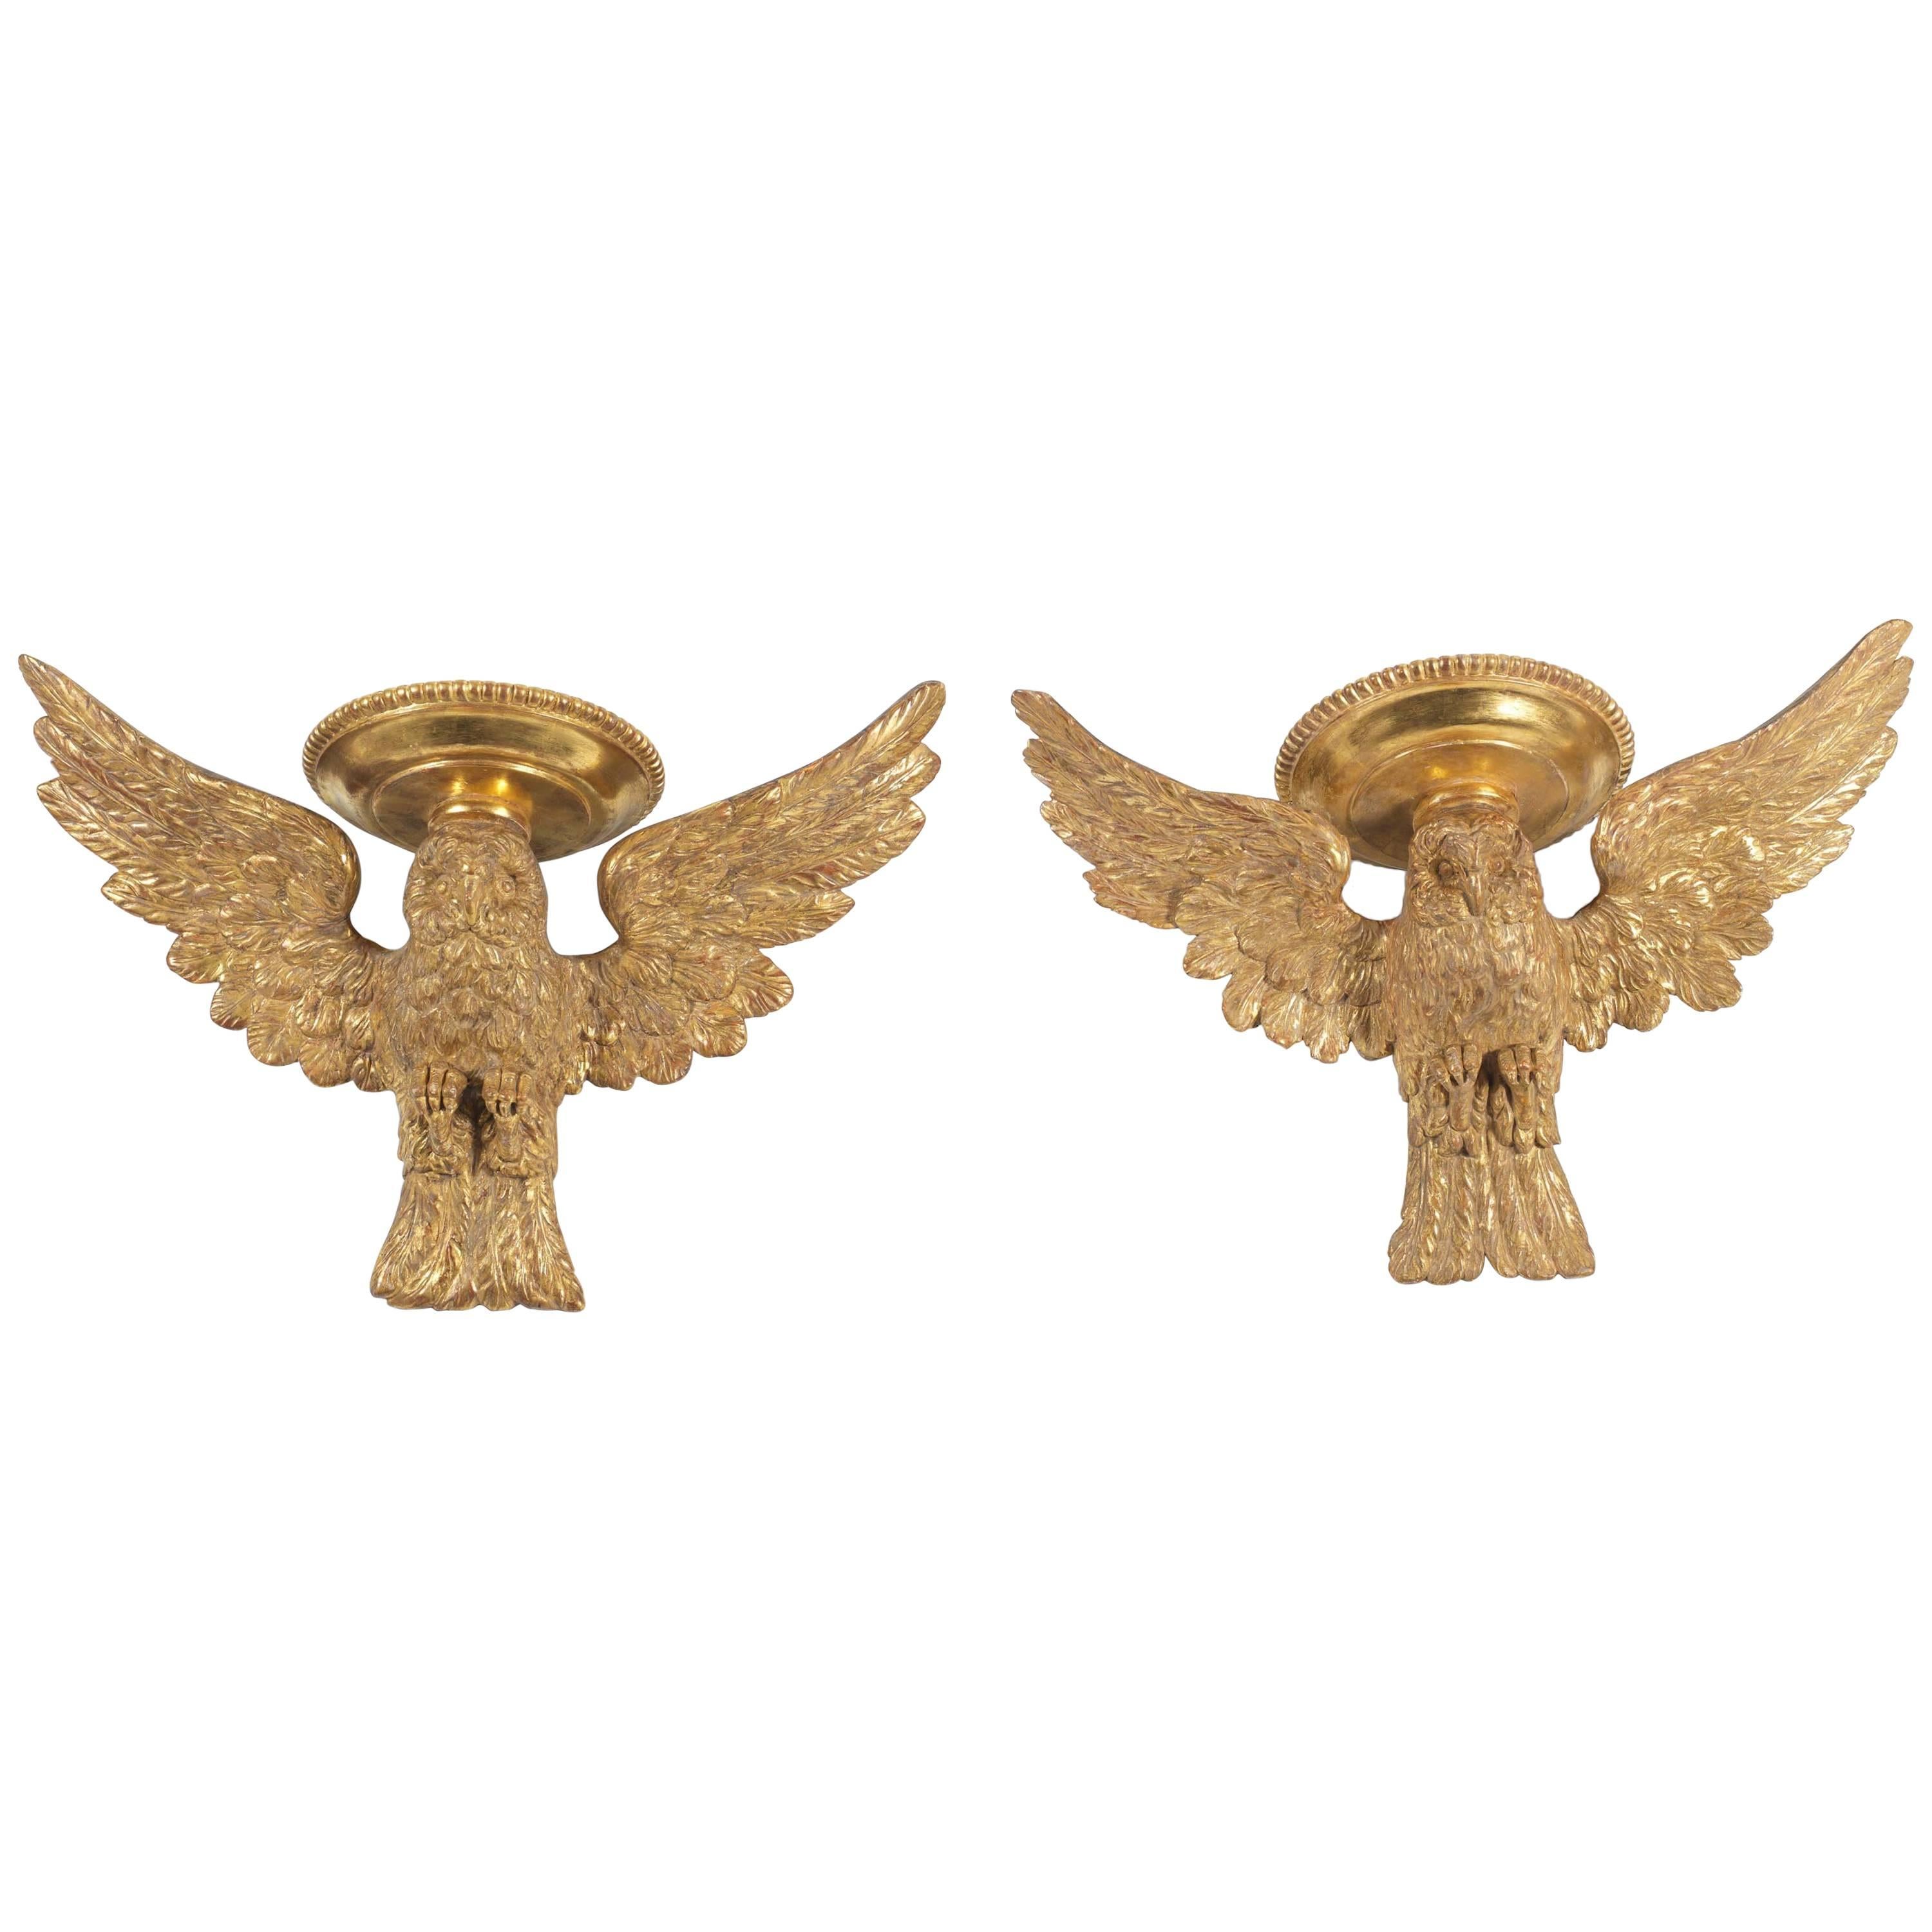 Pair of Owl Wall Brackets, Early 19th Century, Hand Carved Wood, Gesso and Gilt  For Sale